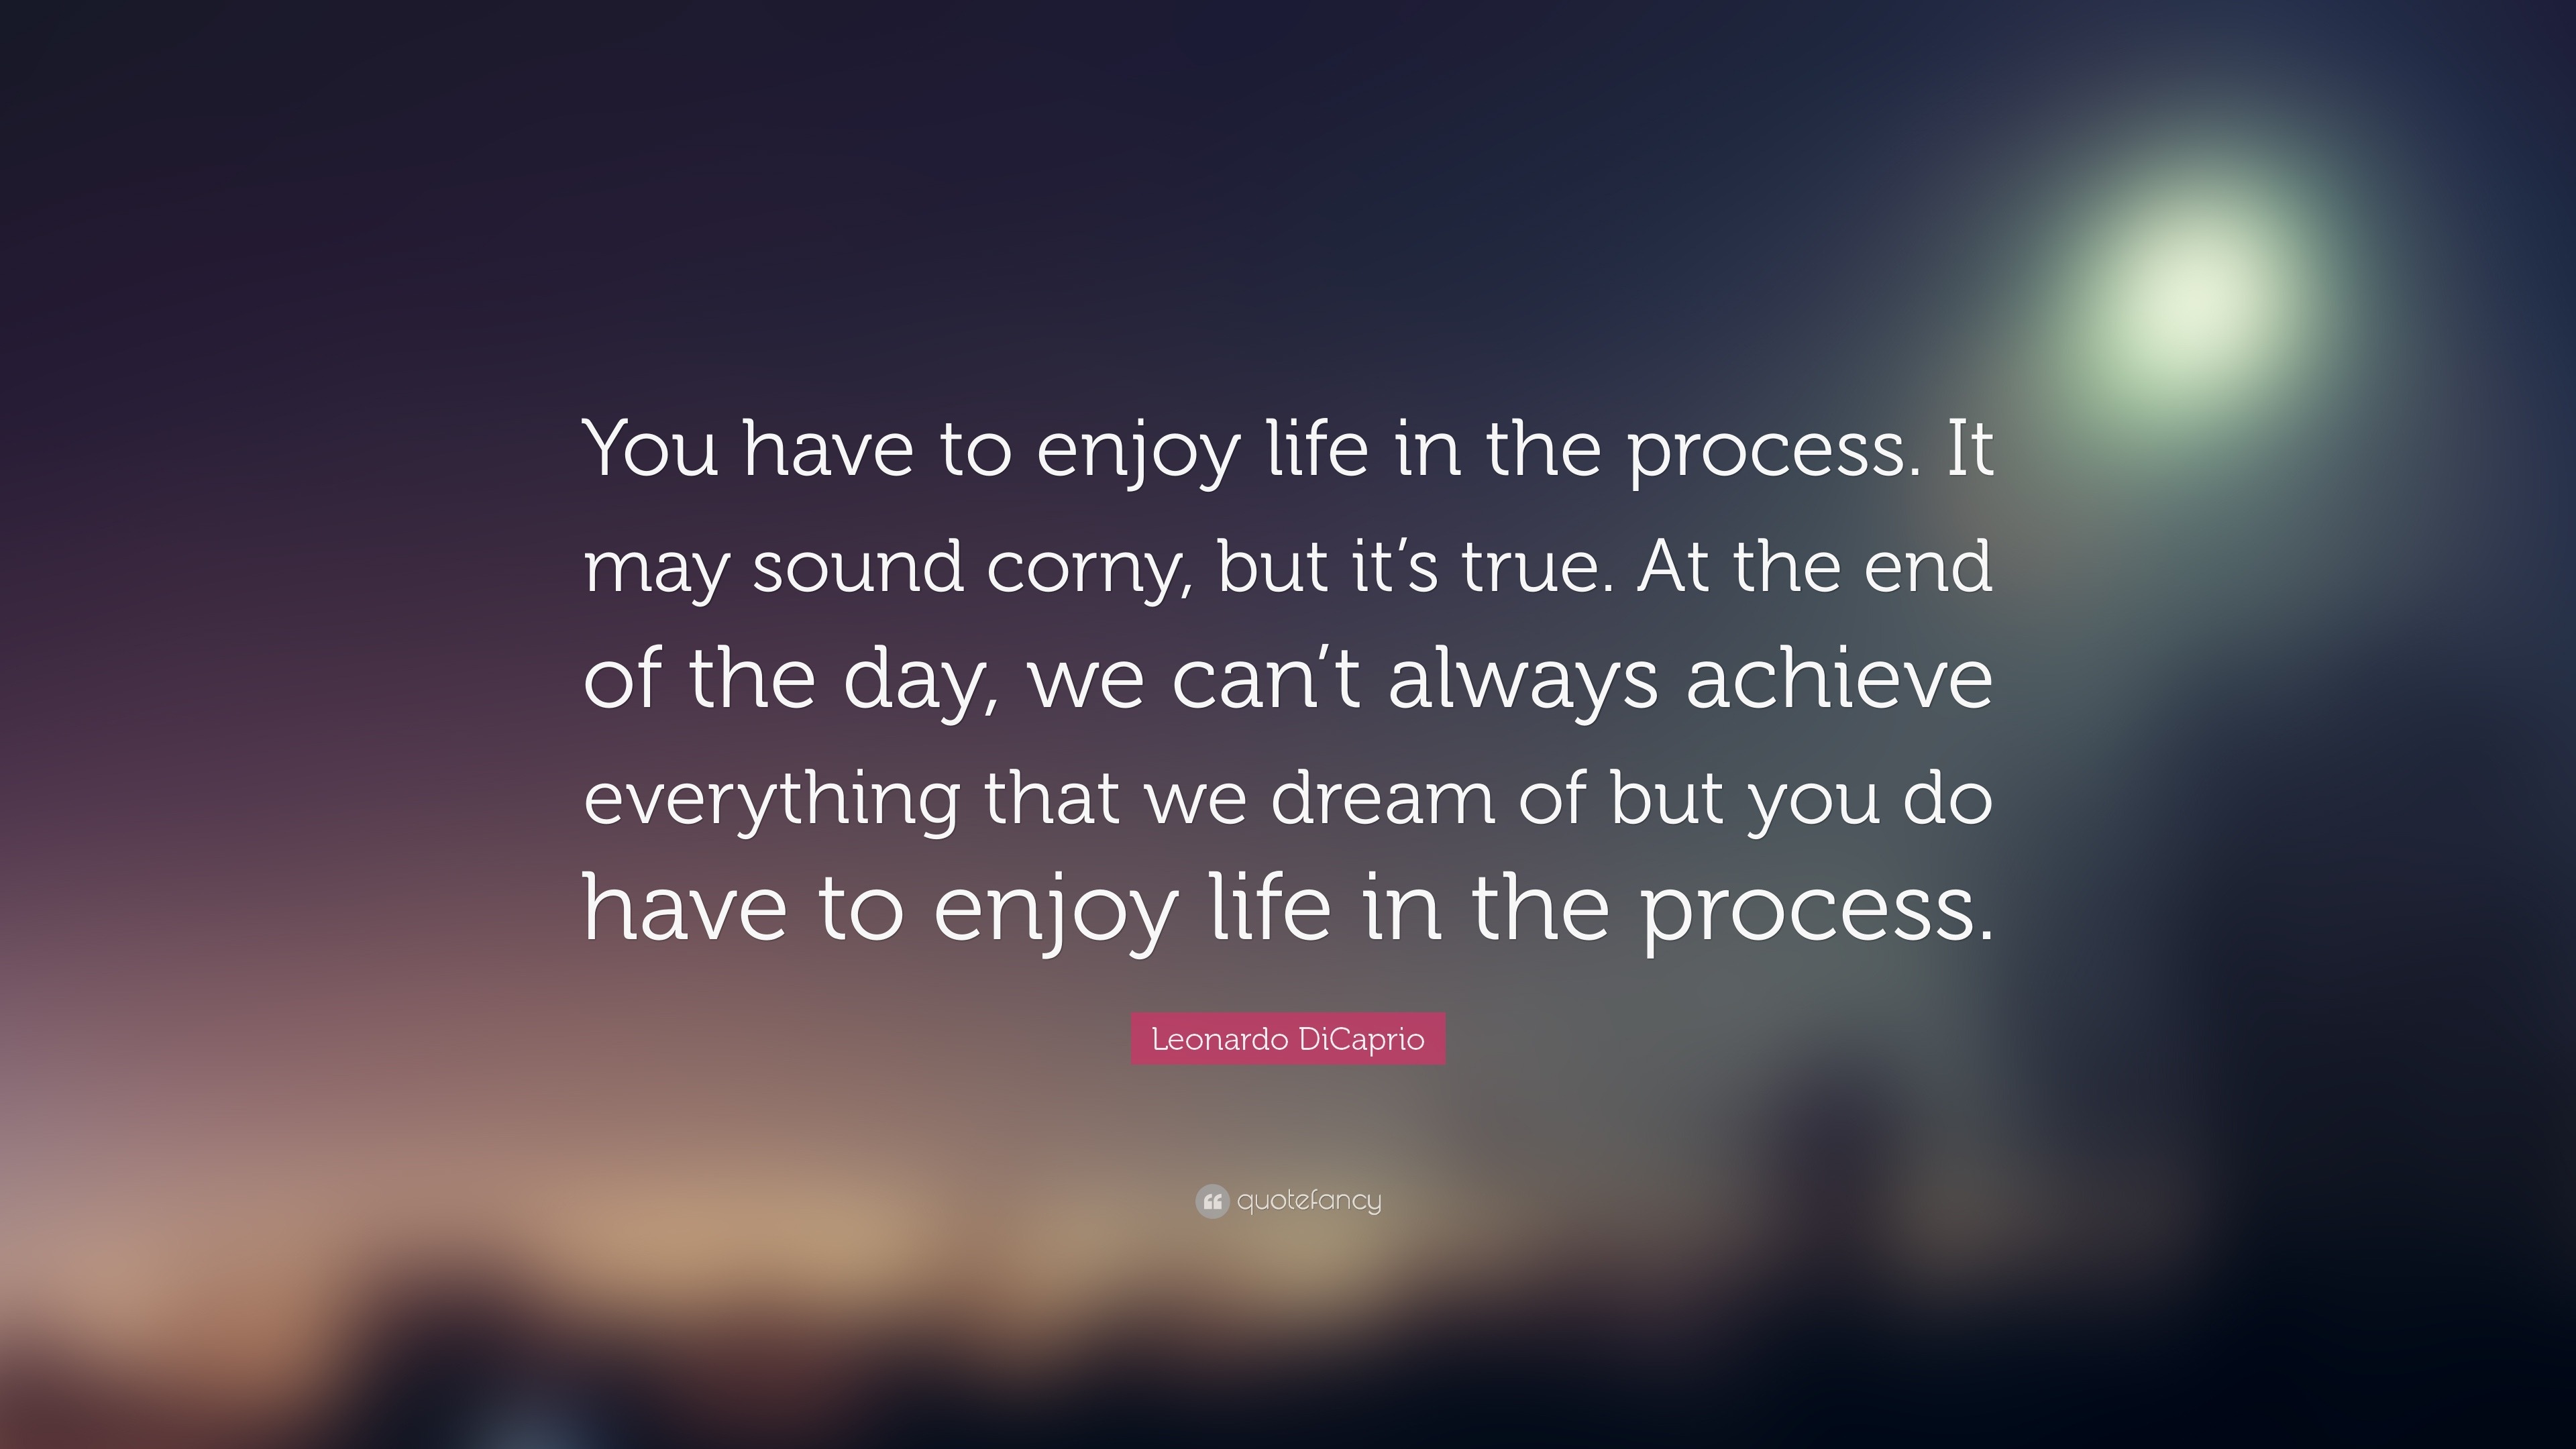 Leonardo DiCaprio Quote: “You have to enjoy life in the process. It may